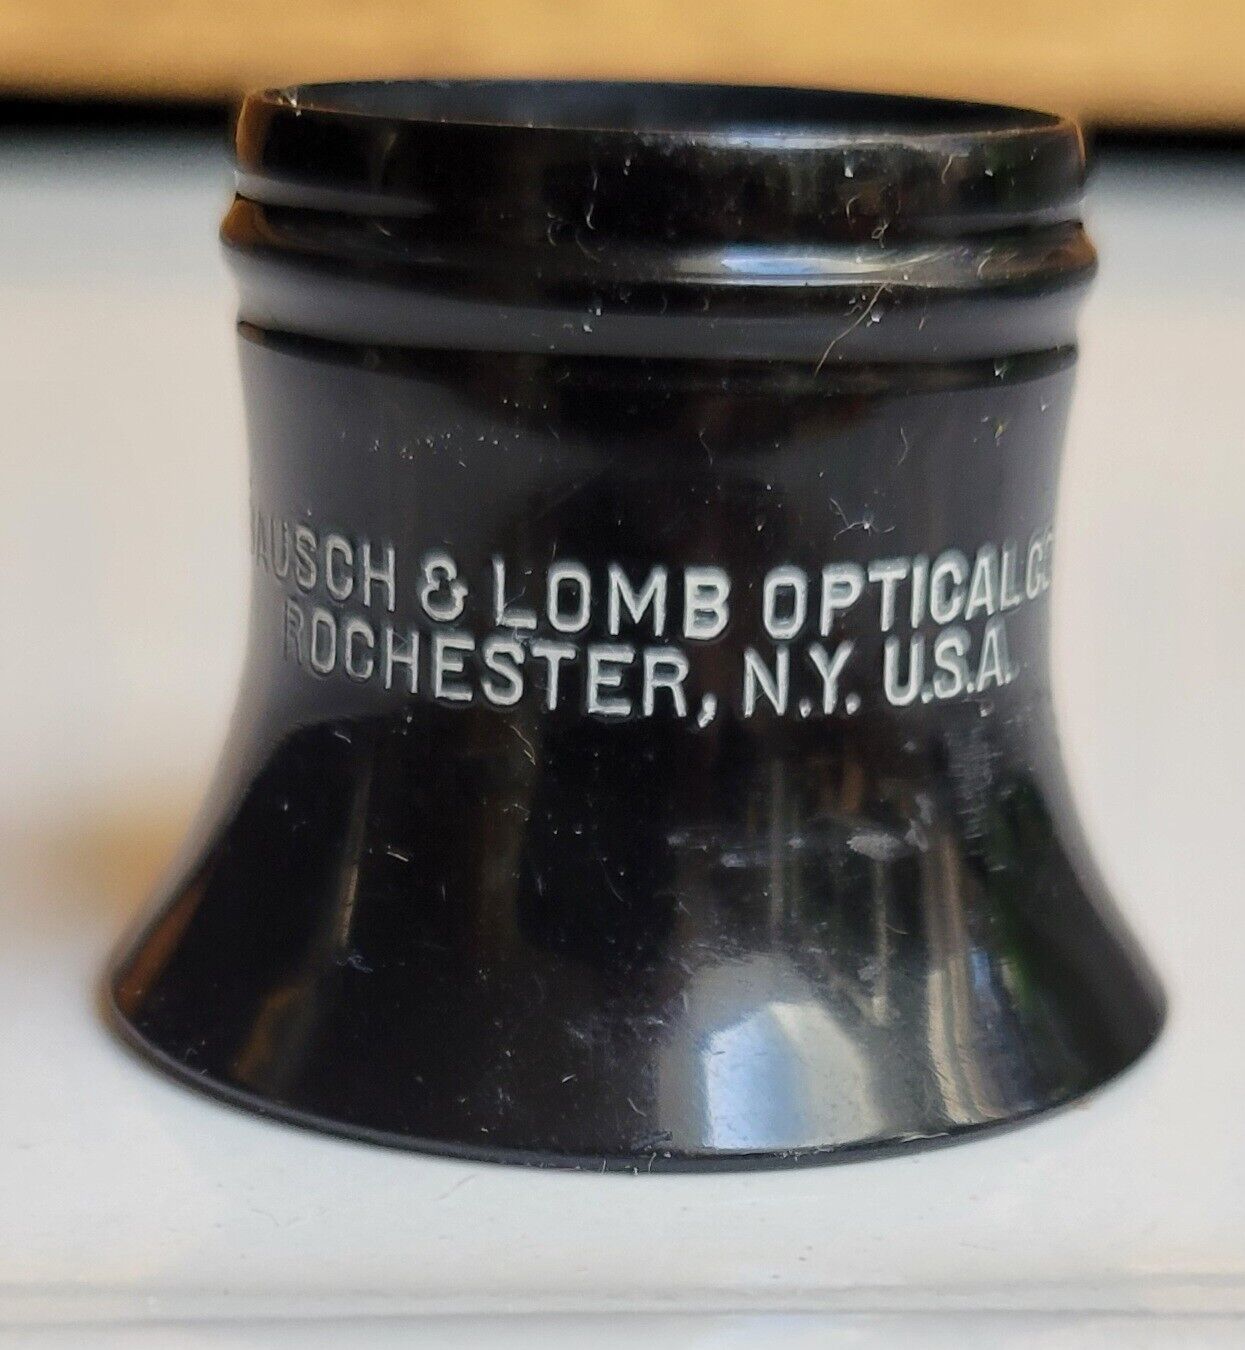 Vtg BAUSCH & LOMB OPTICAL CO. ROCHESTER, N.Y. U.S.A. 2in.x5X  Watchmaker Loupe